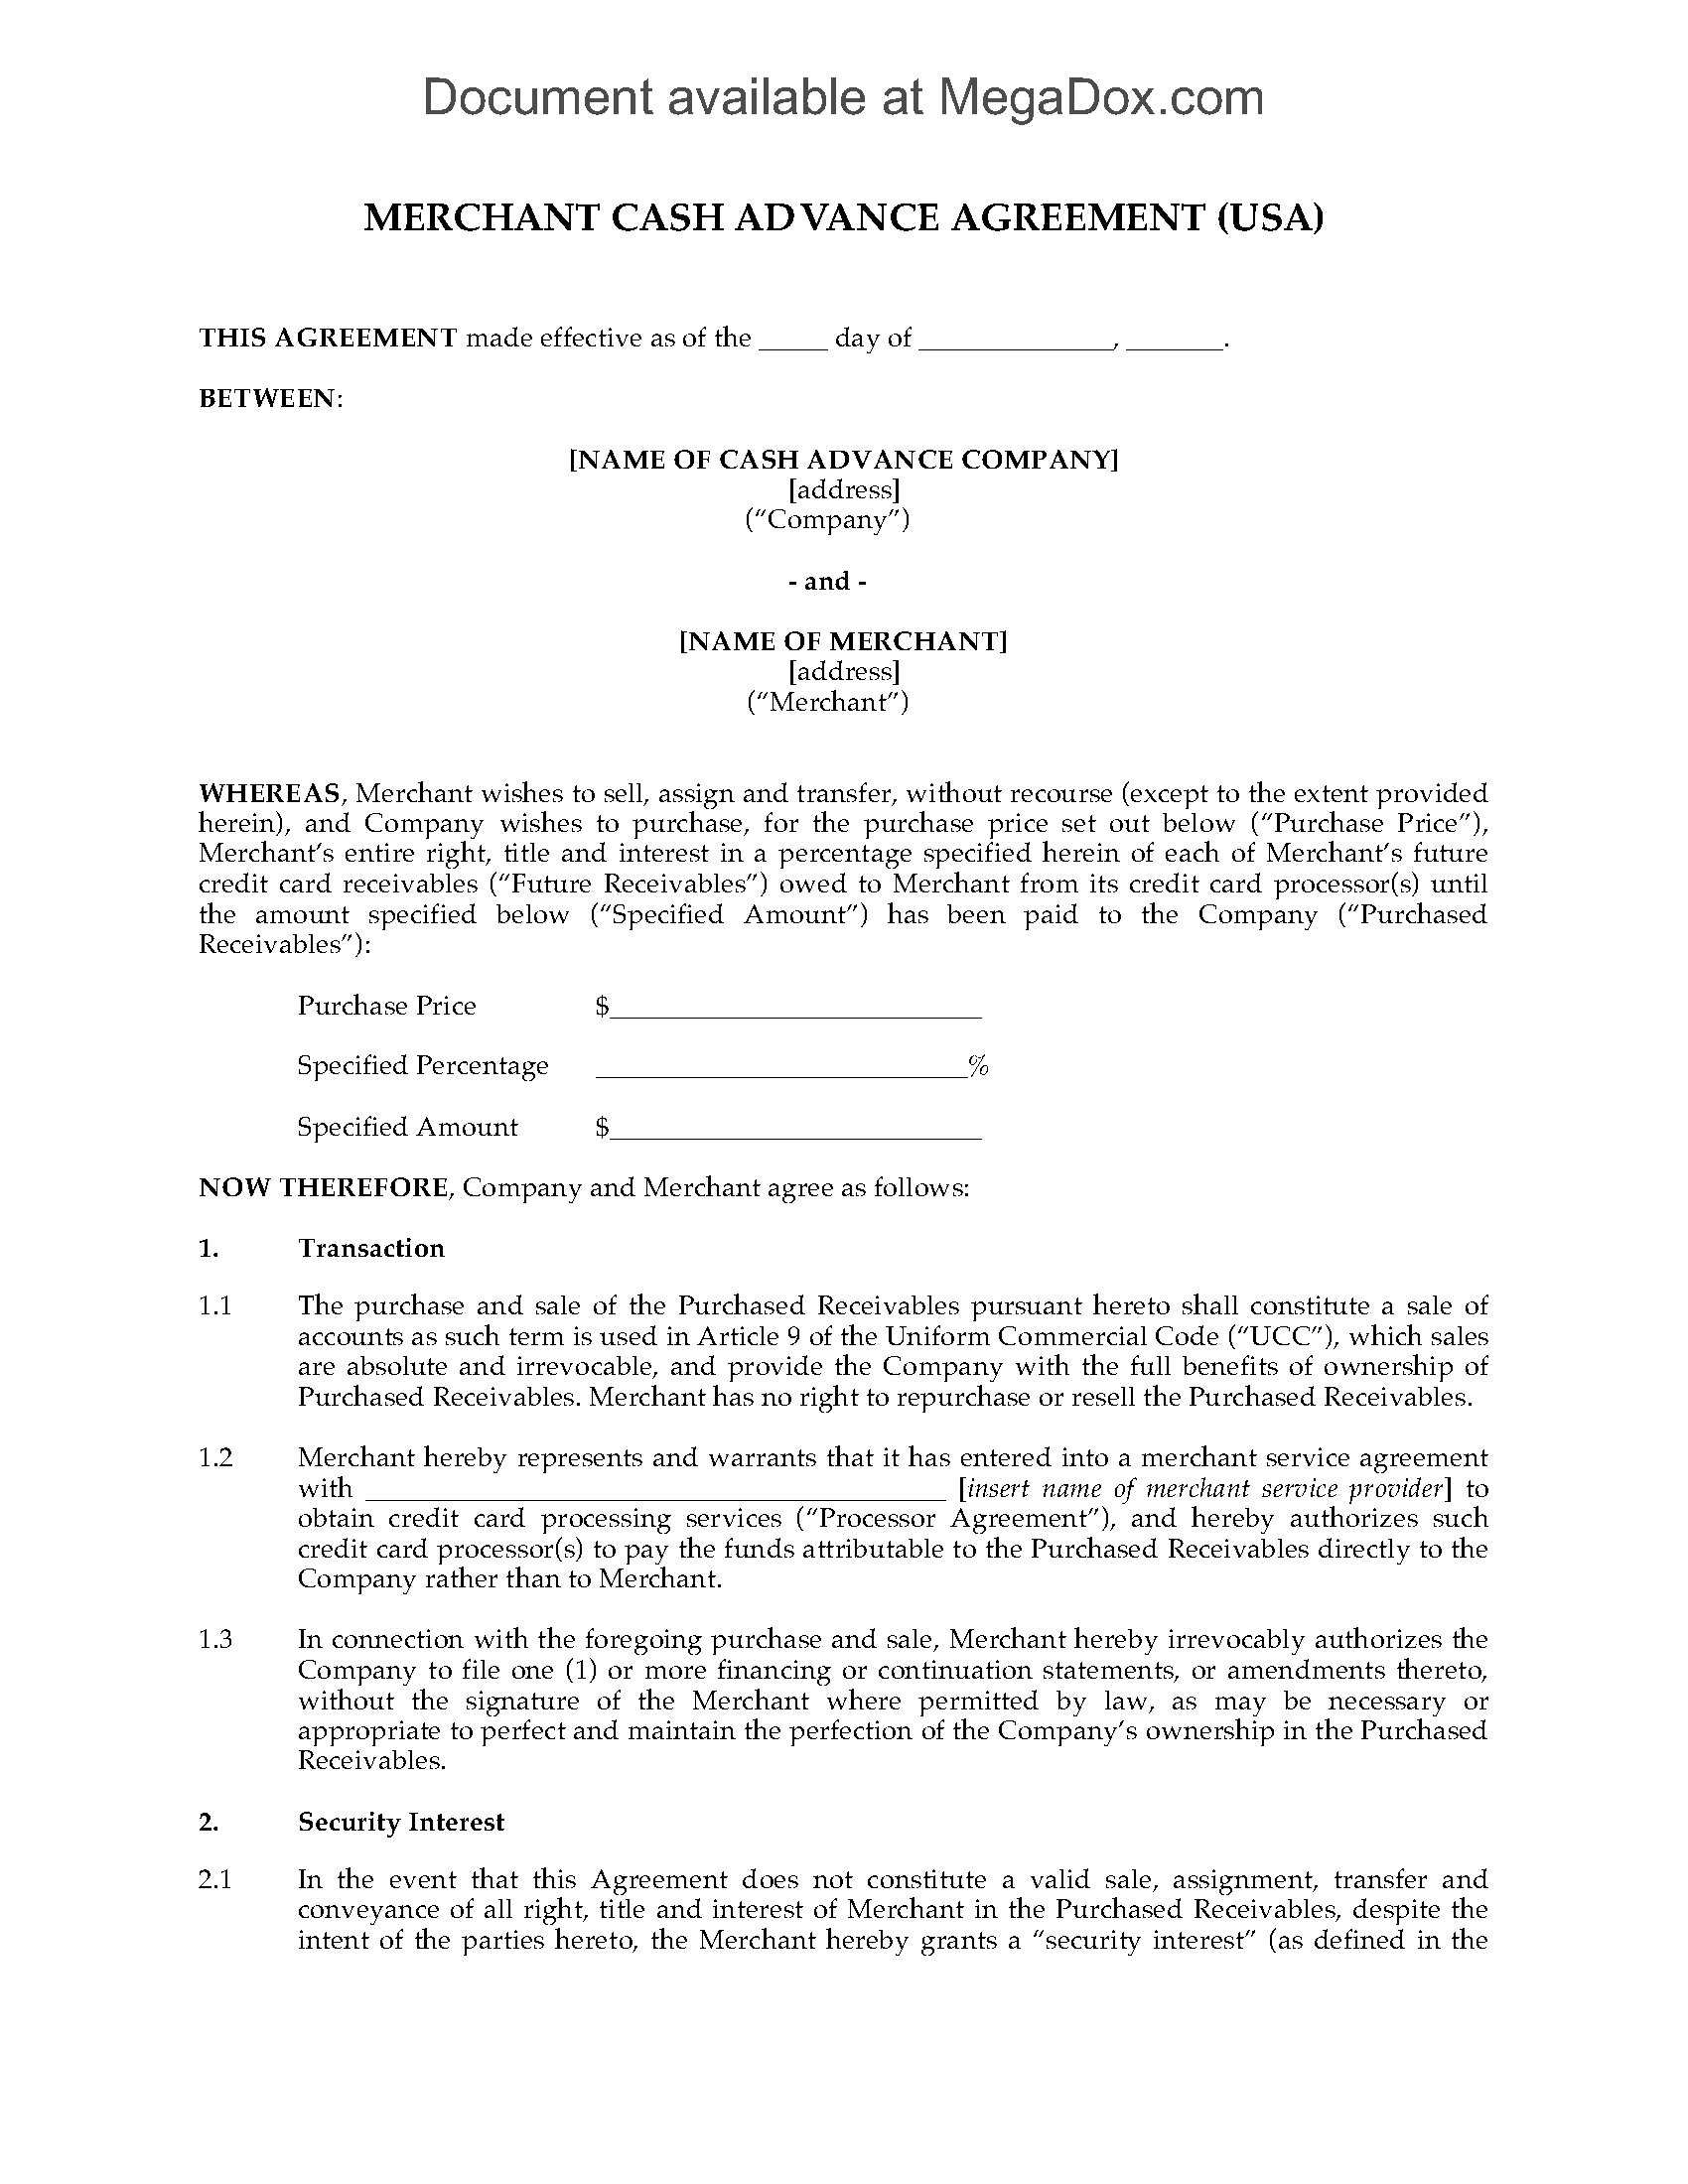 Usa Merchant Cash Advance Agreement In Corporate Credit Card Agreement Template